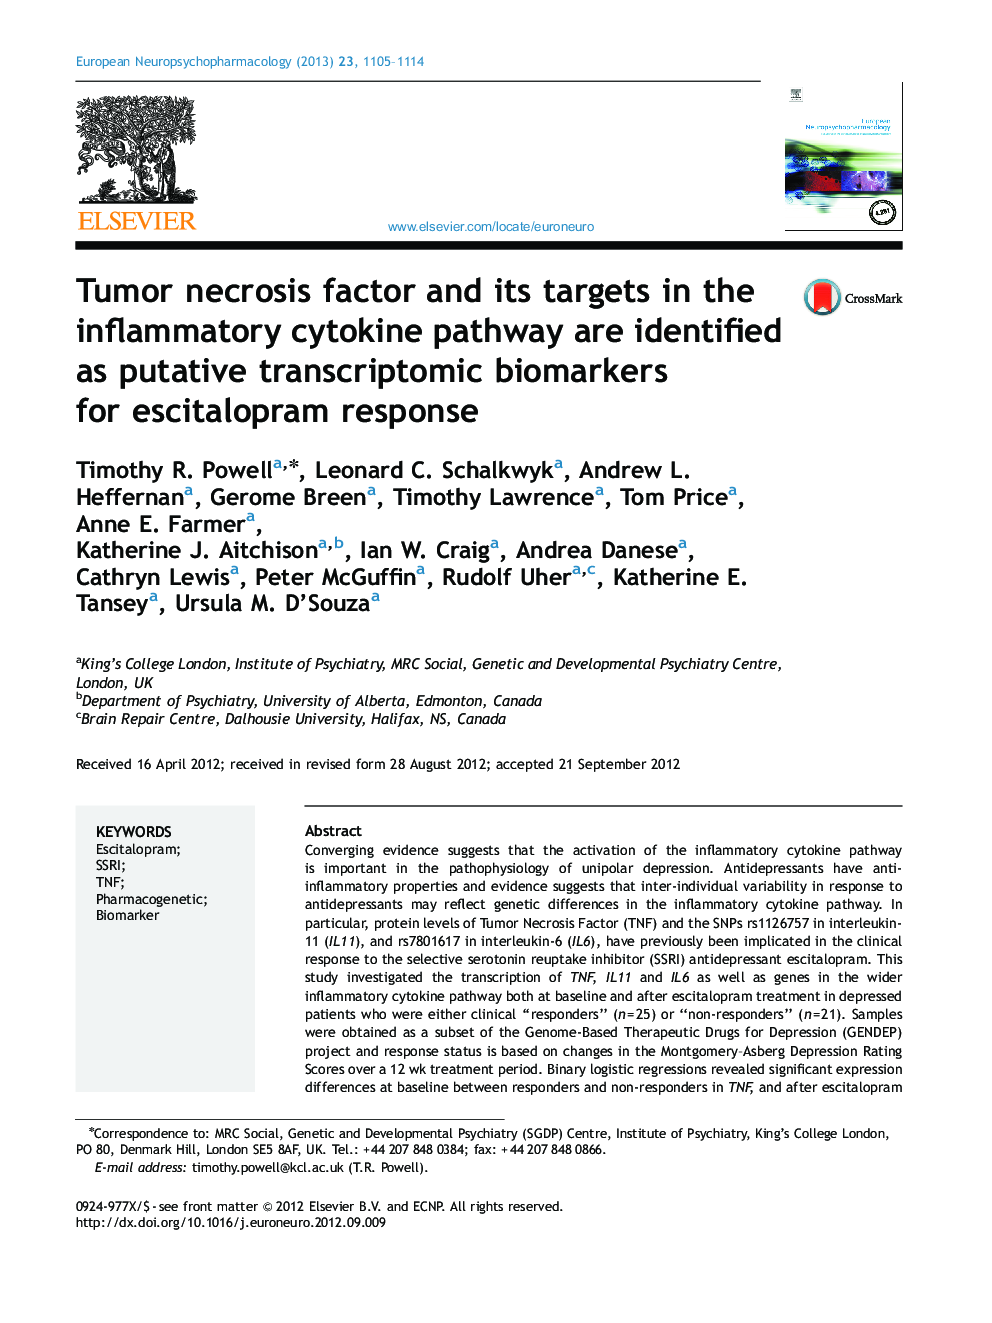 Tumor necrosis factor and its targets in the inflammatory cytokine pathway are identified as putative transcriptomic biomarkers for escitalopram response